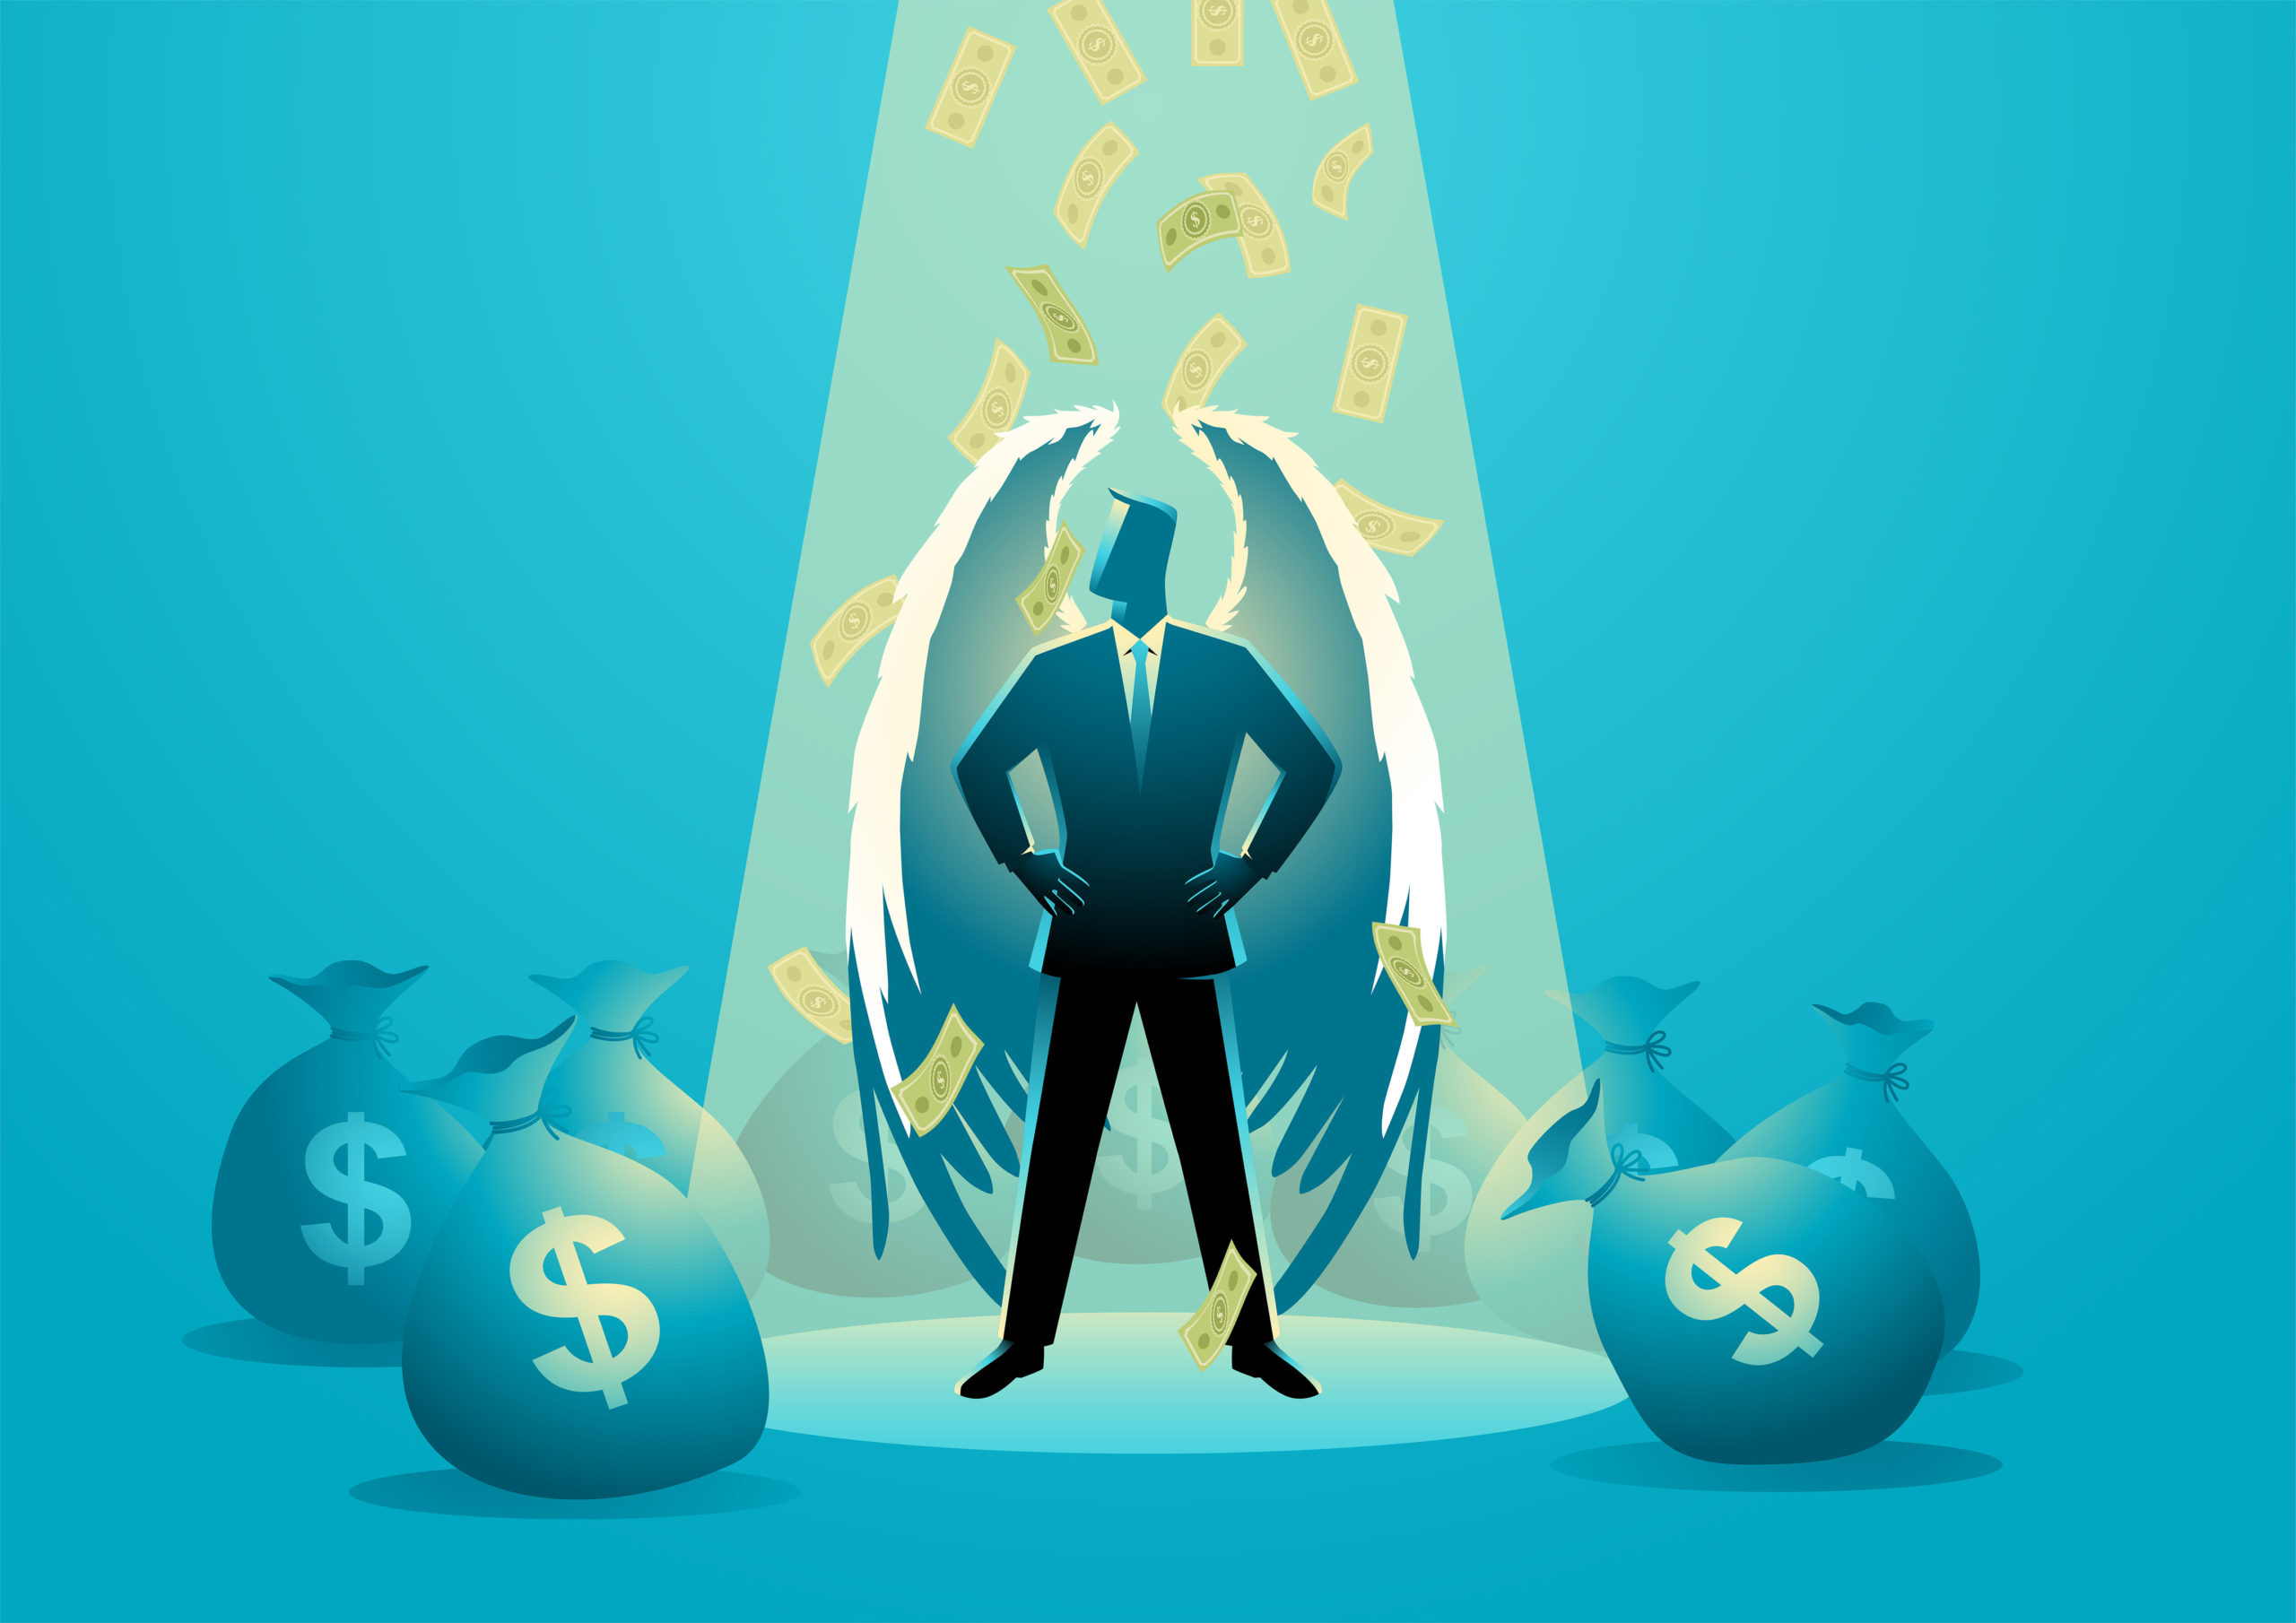 Business concept vector illustration of an angel businessman standing under spotlight with money rain and bags around him.